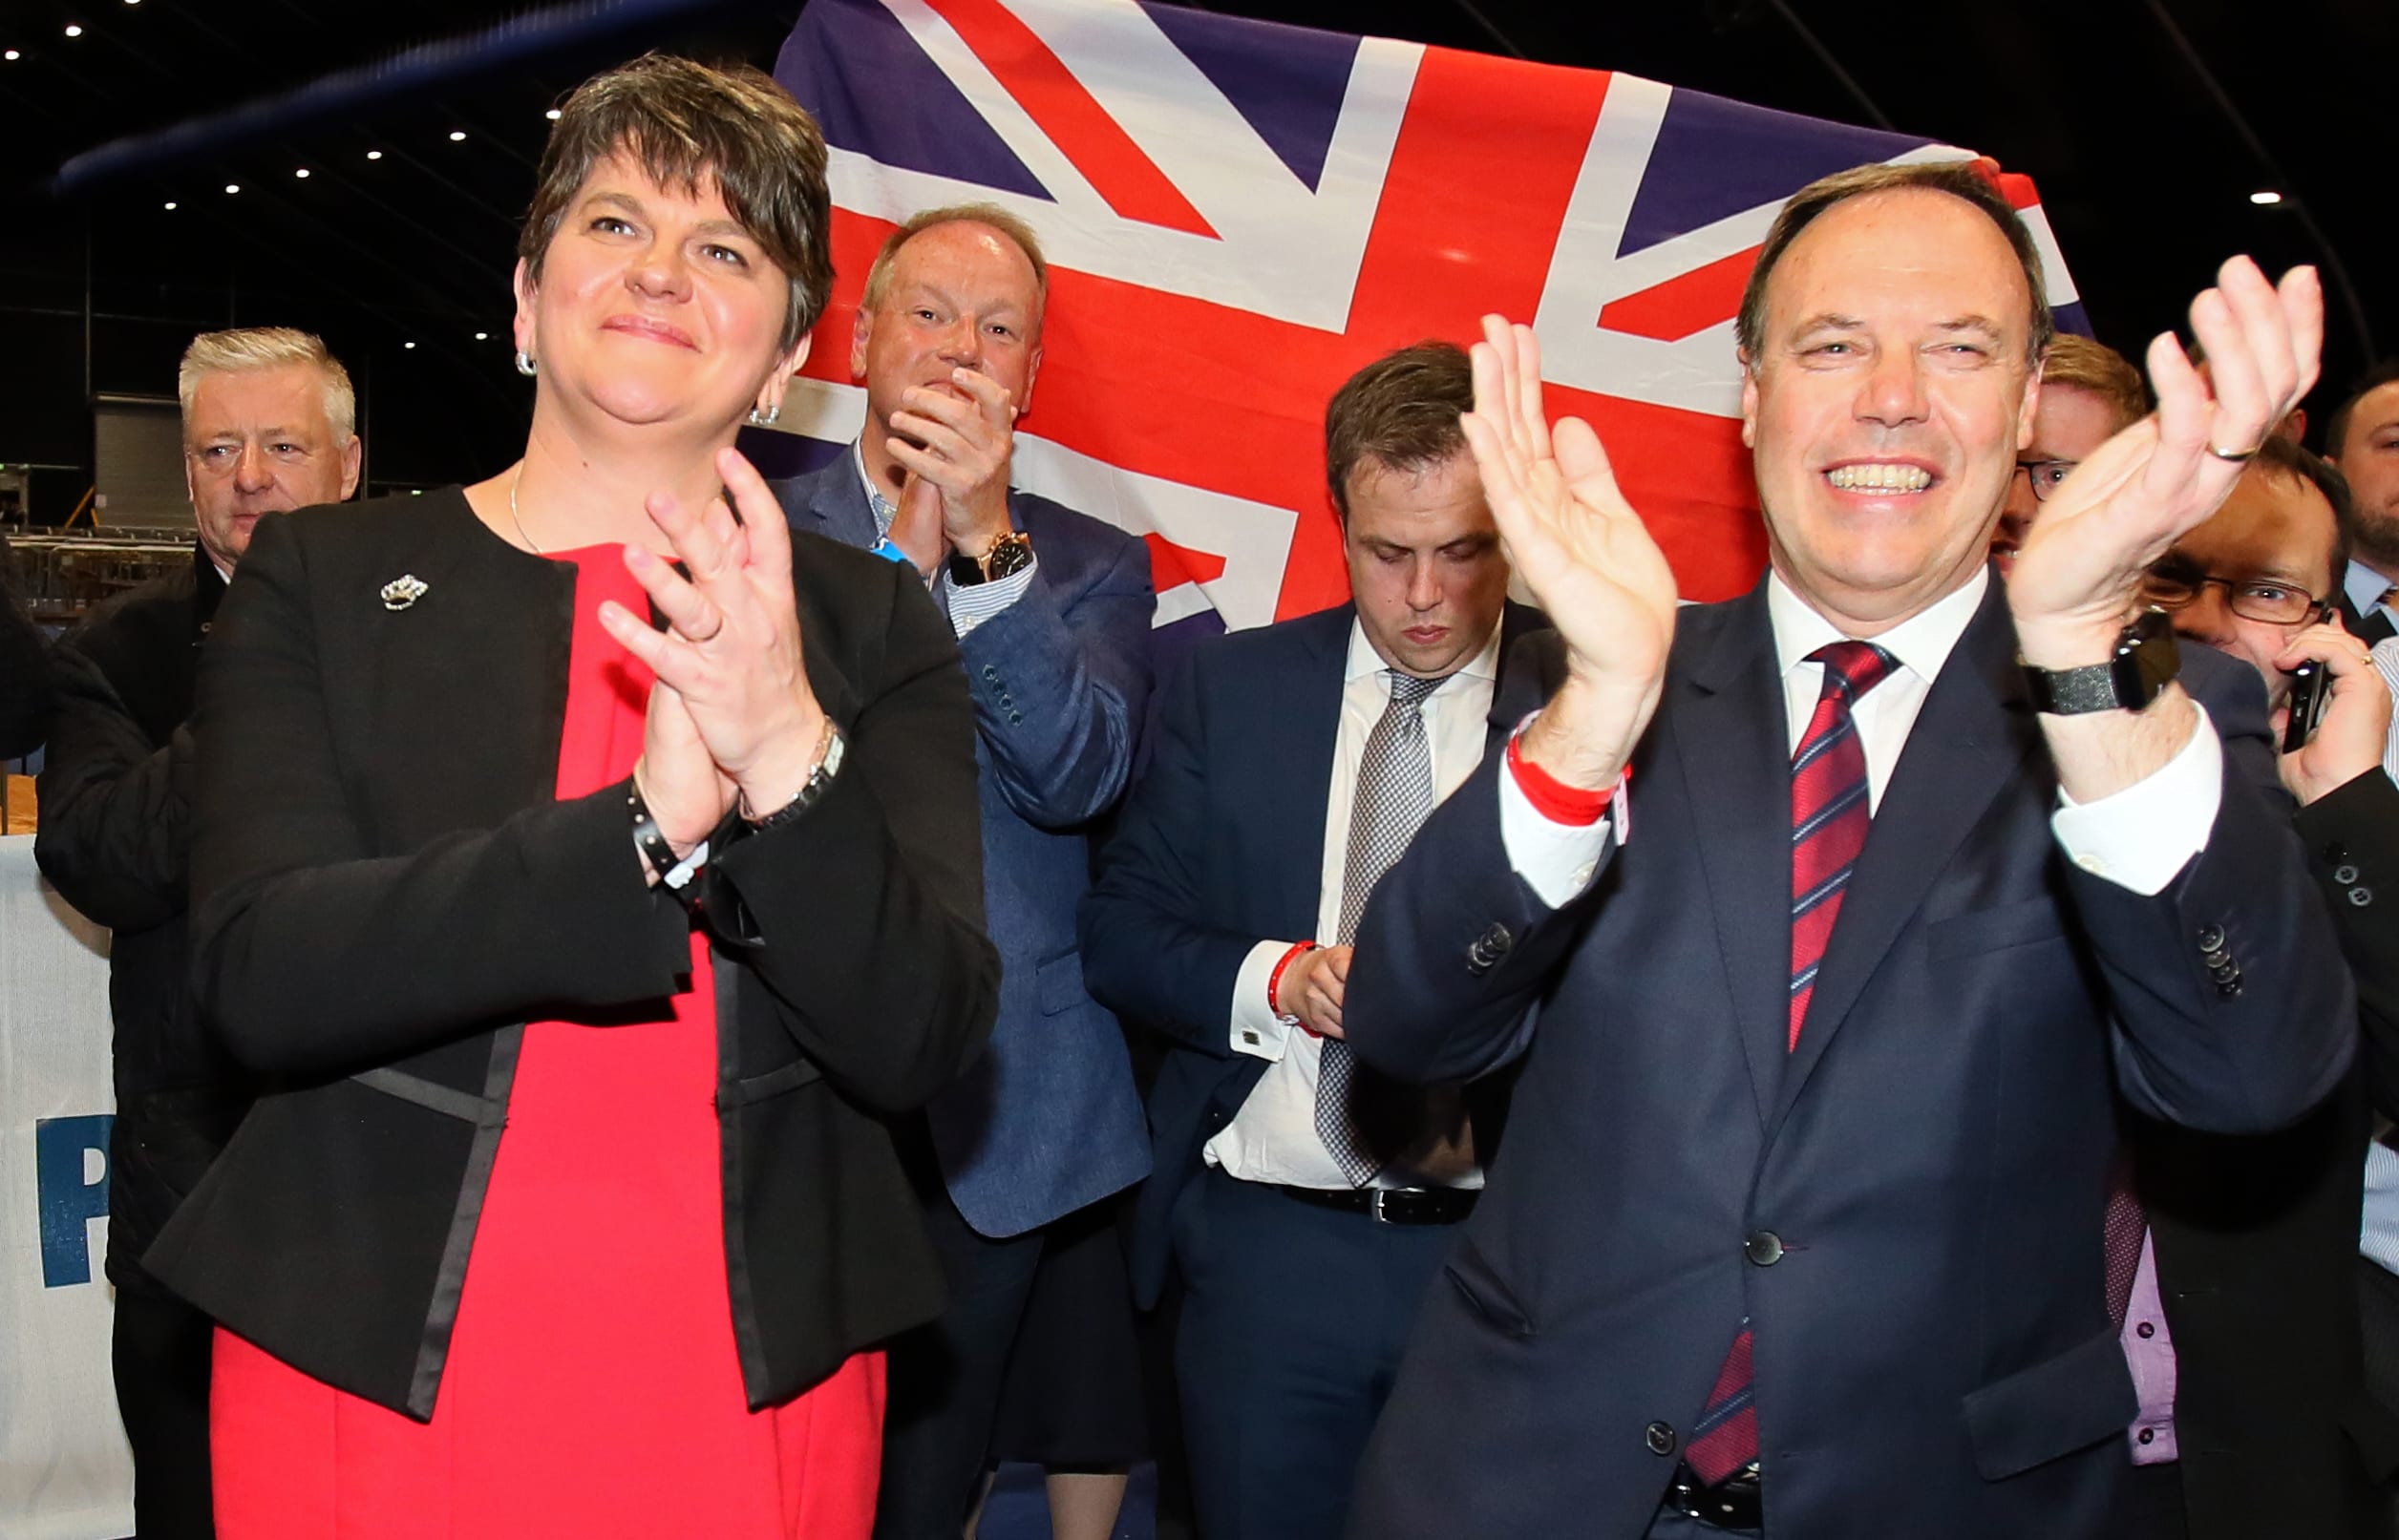 Democratic Unionist Party (DUP) deputy leader Nigel Dodds, at right,  and leader Arlene Foster. celebrate Dodds winning his Belfast North seat.